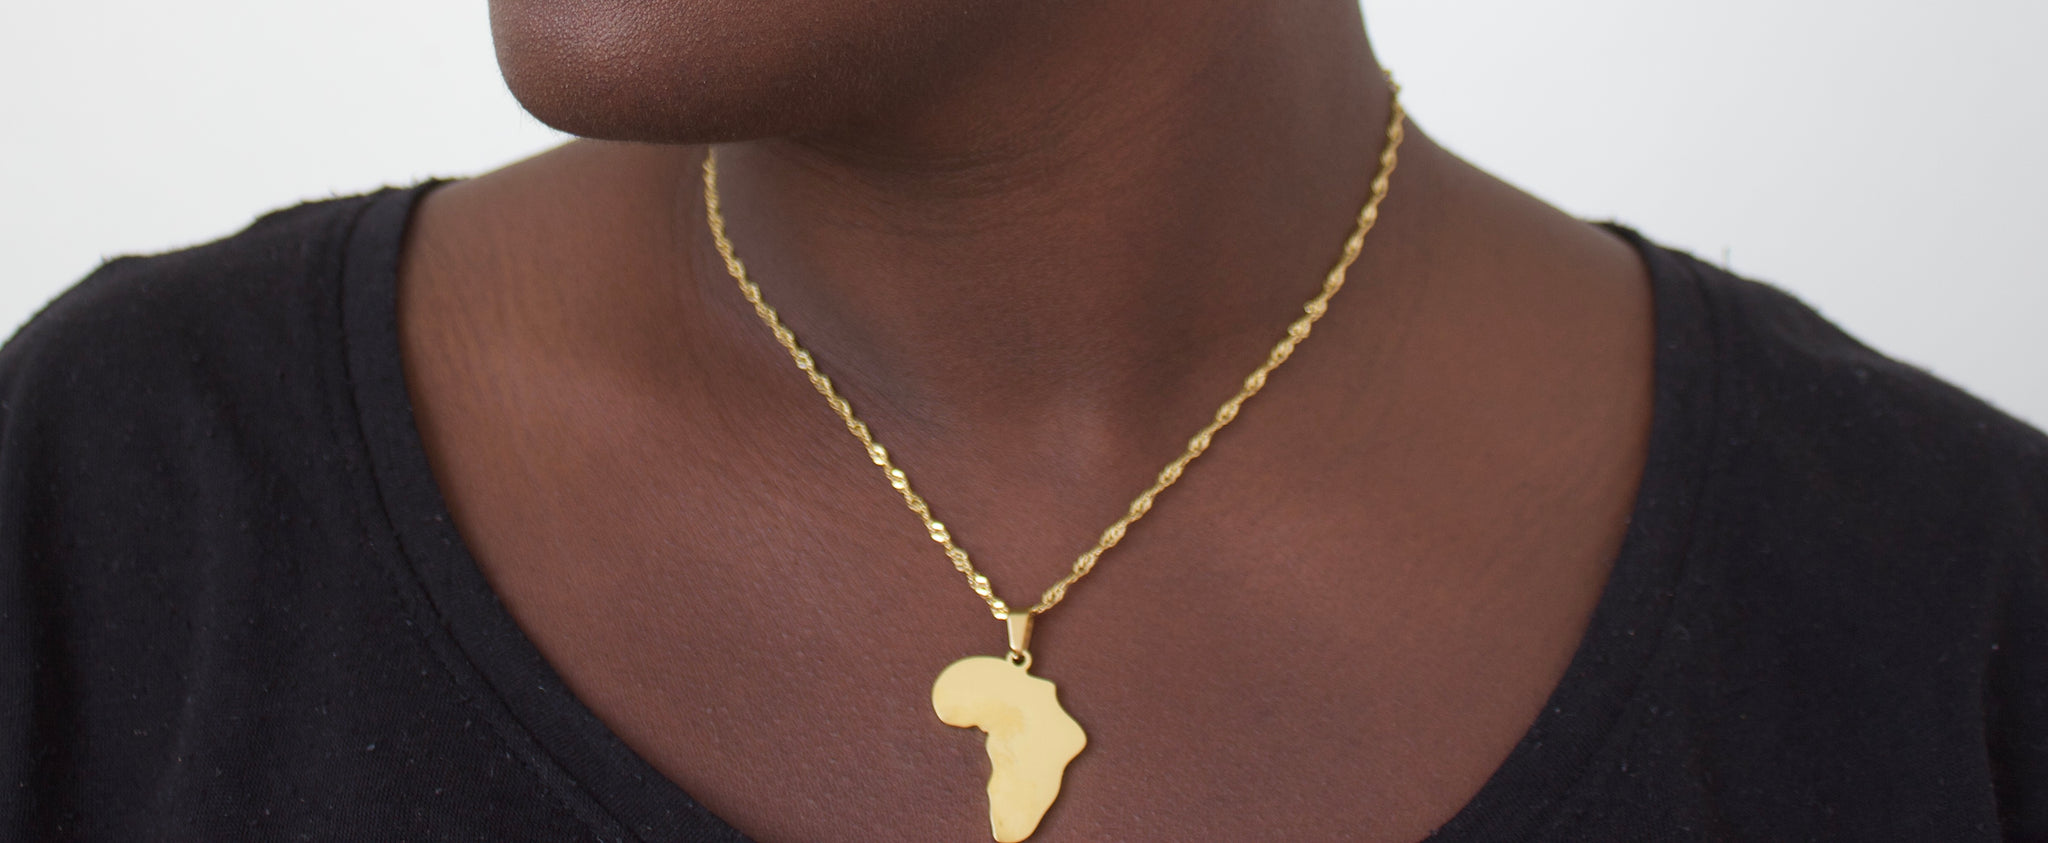 Buy Africa Necklace With Engraved Lion Face, Silver Animal Map Necklace for  African, Leo Necklace for Best Friend, Cool Male Necklace for Dad Online in  India - Etsy